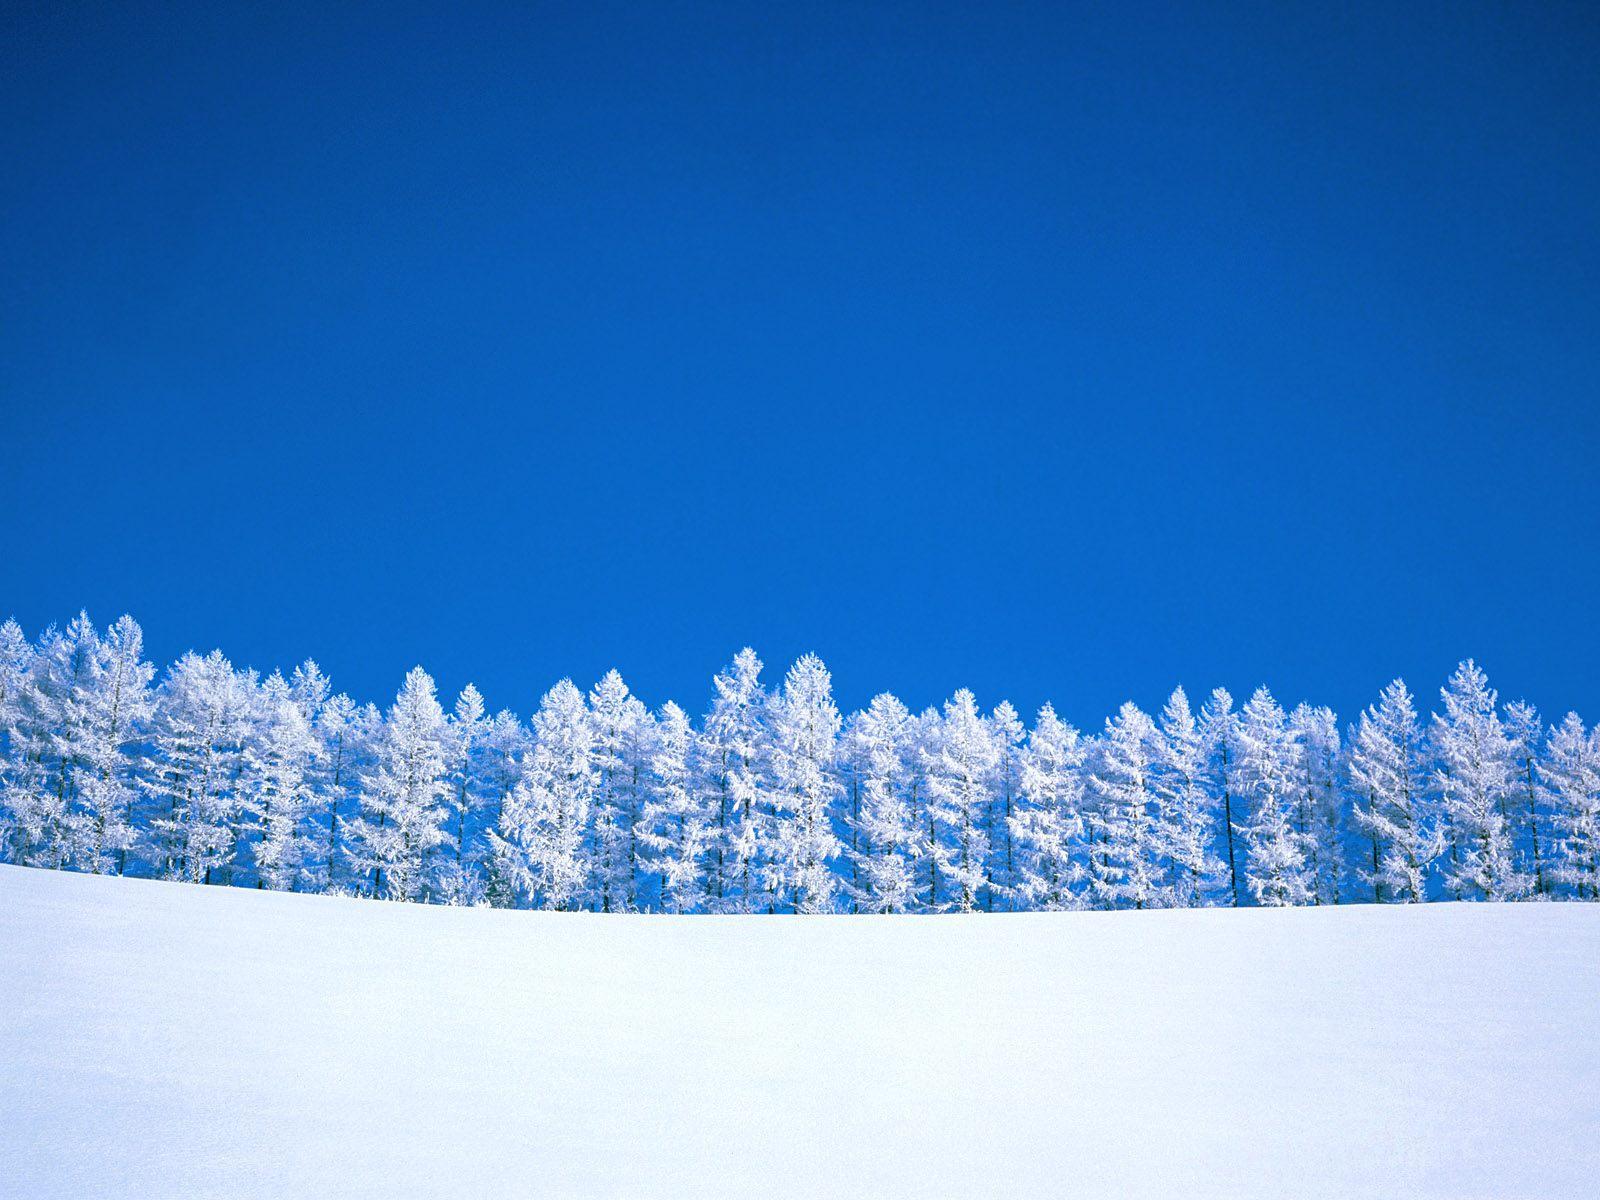 Snow Background Hq Background 15 HD Wallpaper. Hdimges